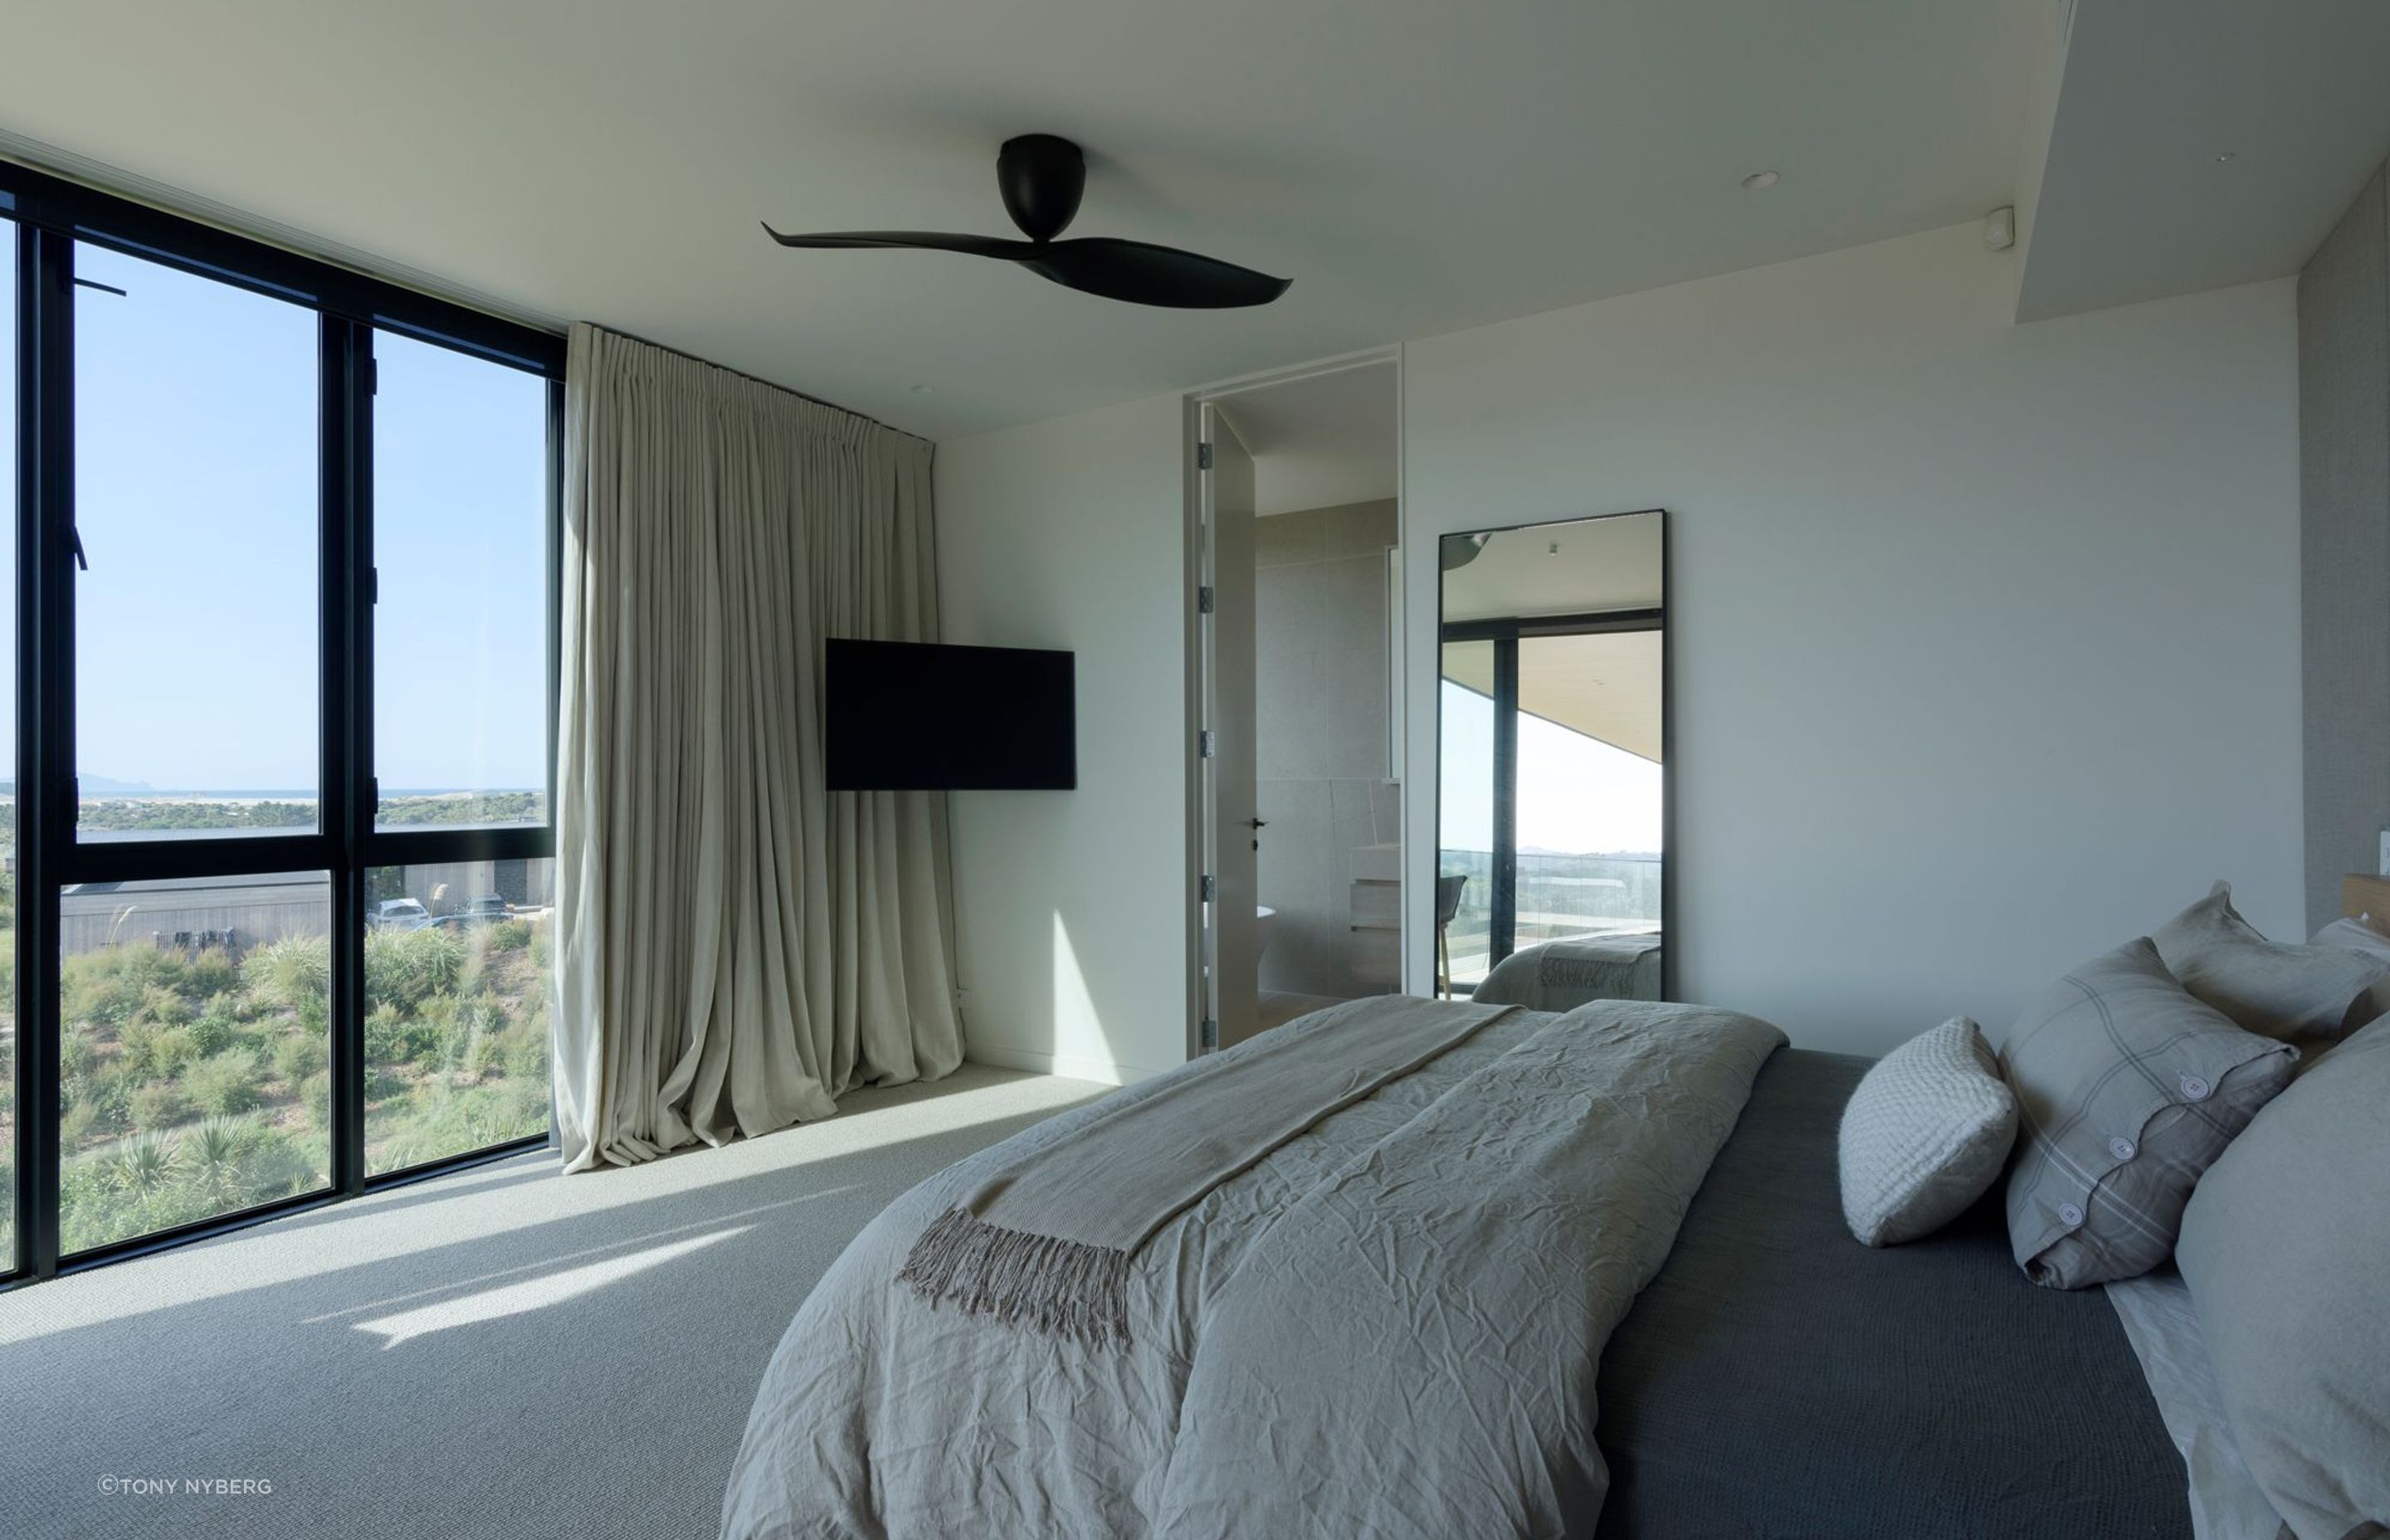 A relaxed aesthetic continues into the bedrooms – each enjoying views through floor-to-ceiling windows.